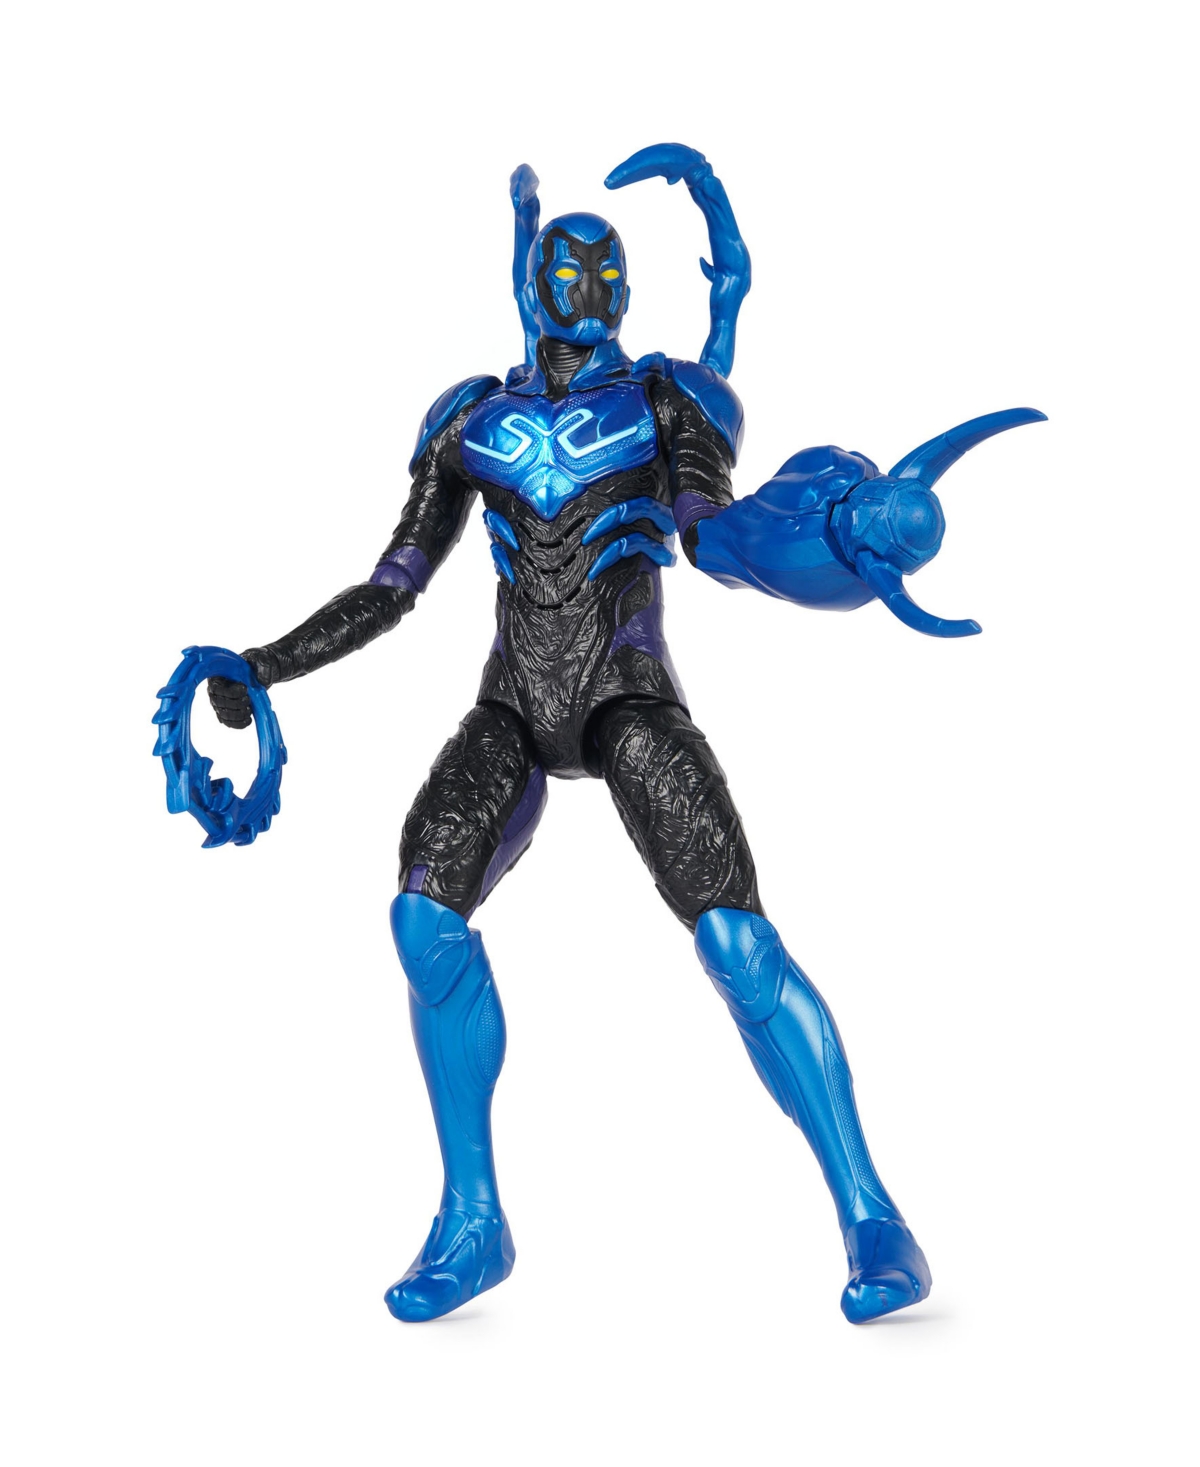 Dc Comics , Battle-mode Blue Beetle Action Figure, 12 In, Lights And Sounds, 3 Accessories, Poseable Movie Col In Multi-color